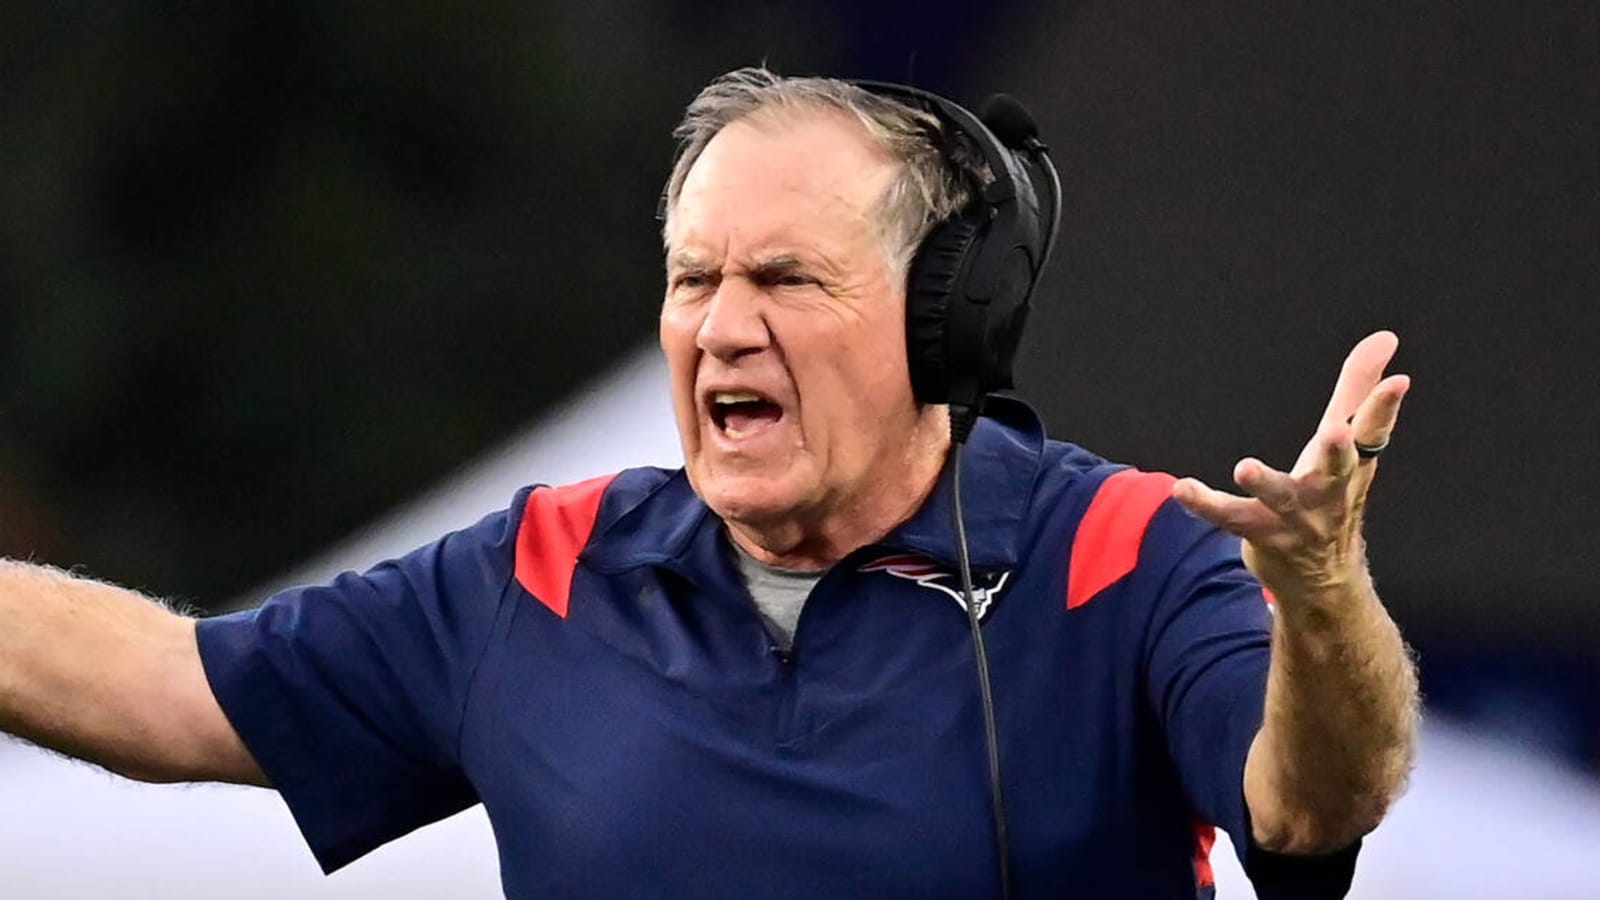 Raiders player felt 'disrespected' by Bill Belichick after Sunday’s win